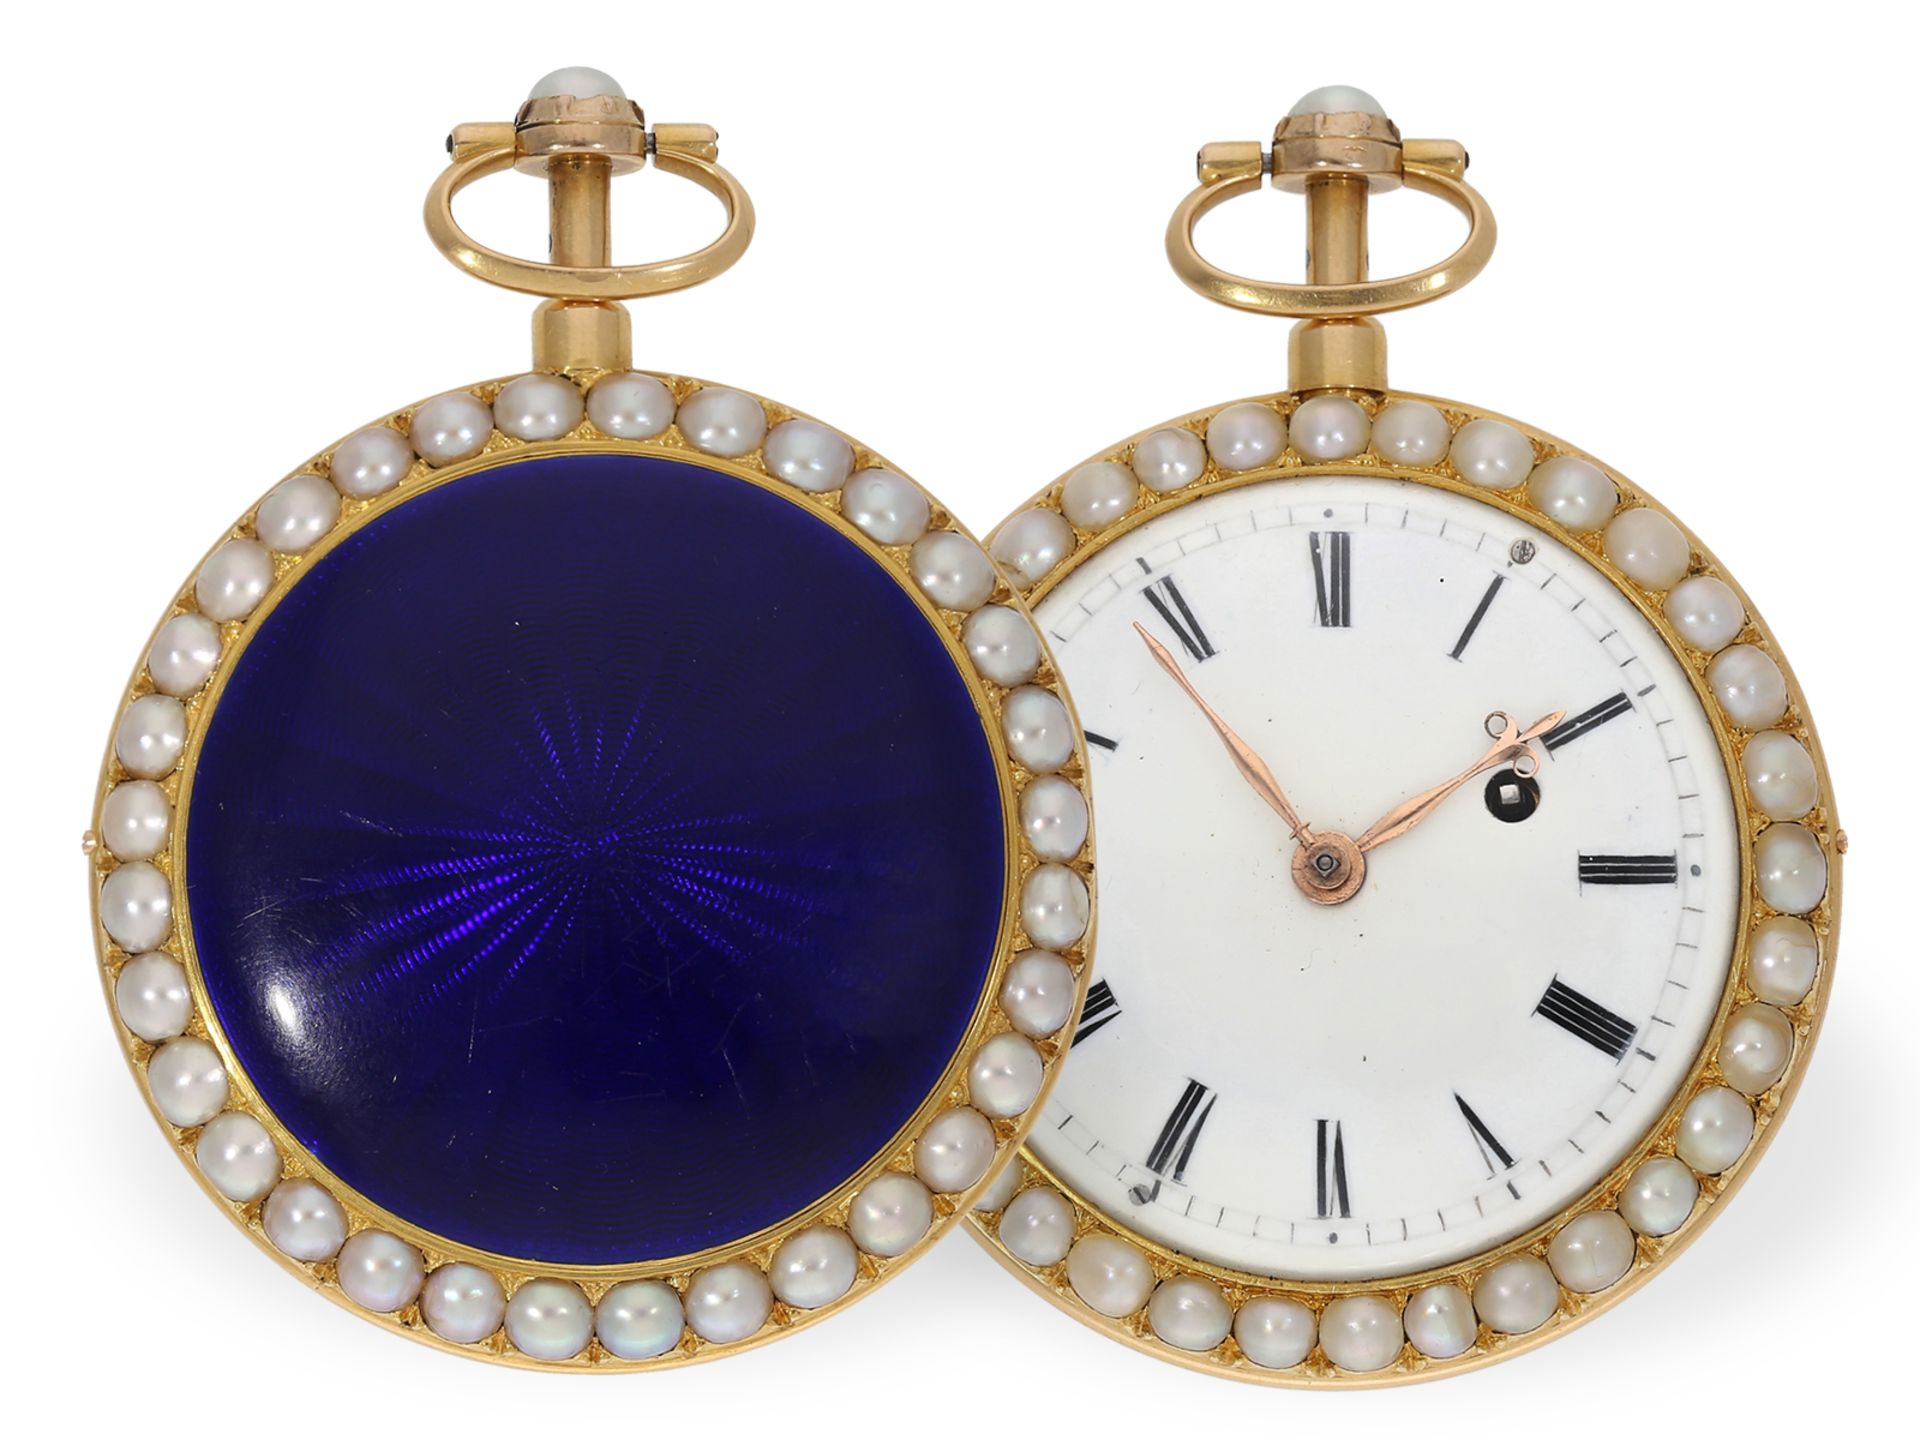 Pocket watch: very fine gold/enamel verge watch set with Oriental pearls and repeater, ca. 1800